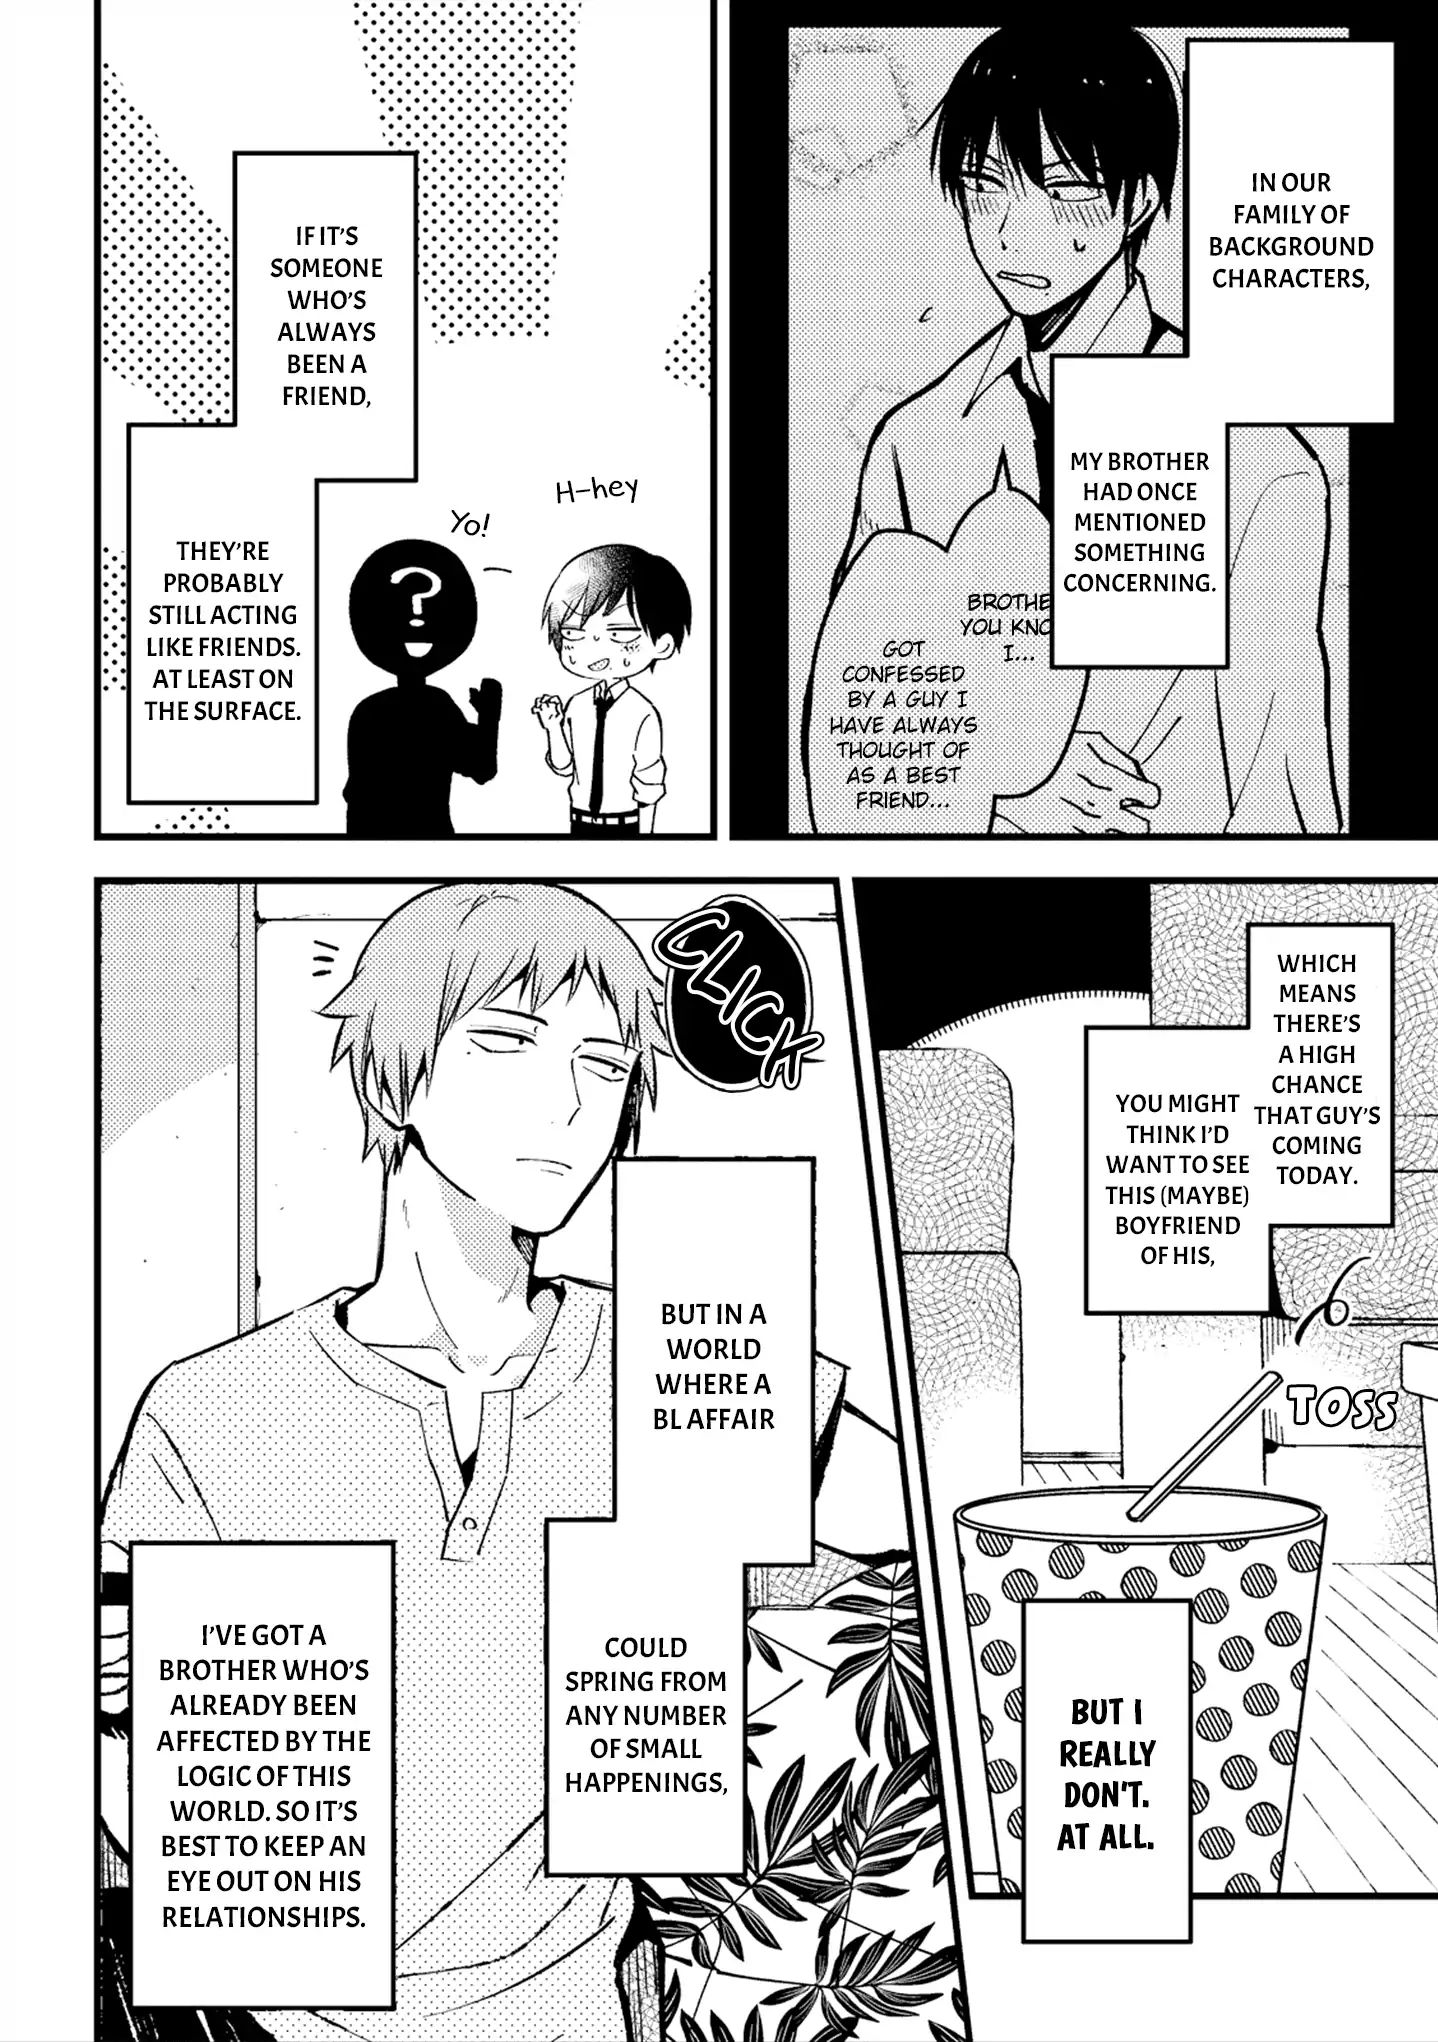 A World Where Everything Definitely Becomes Bl Vs. The Man Who Definitely Doesn't Want To Be In A Bl Chapter 11 #3